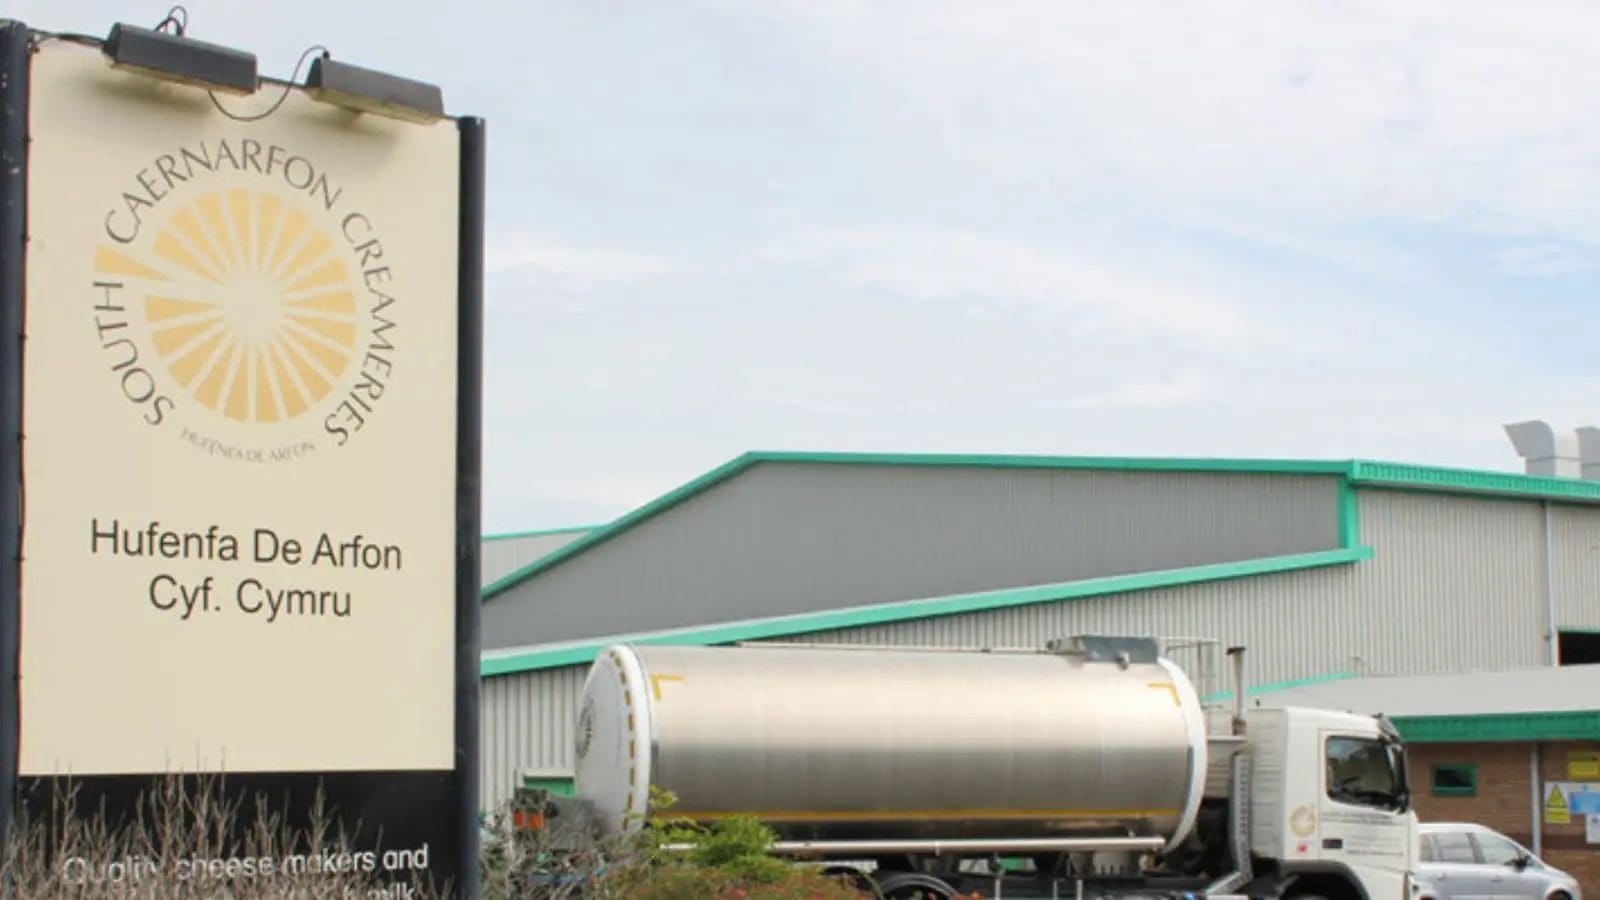 South Caernarfon Creameries hits 17% rise in revenue, invests US$3.77m in expanding Chwilog plant